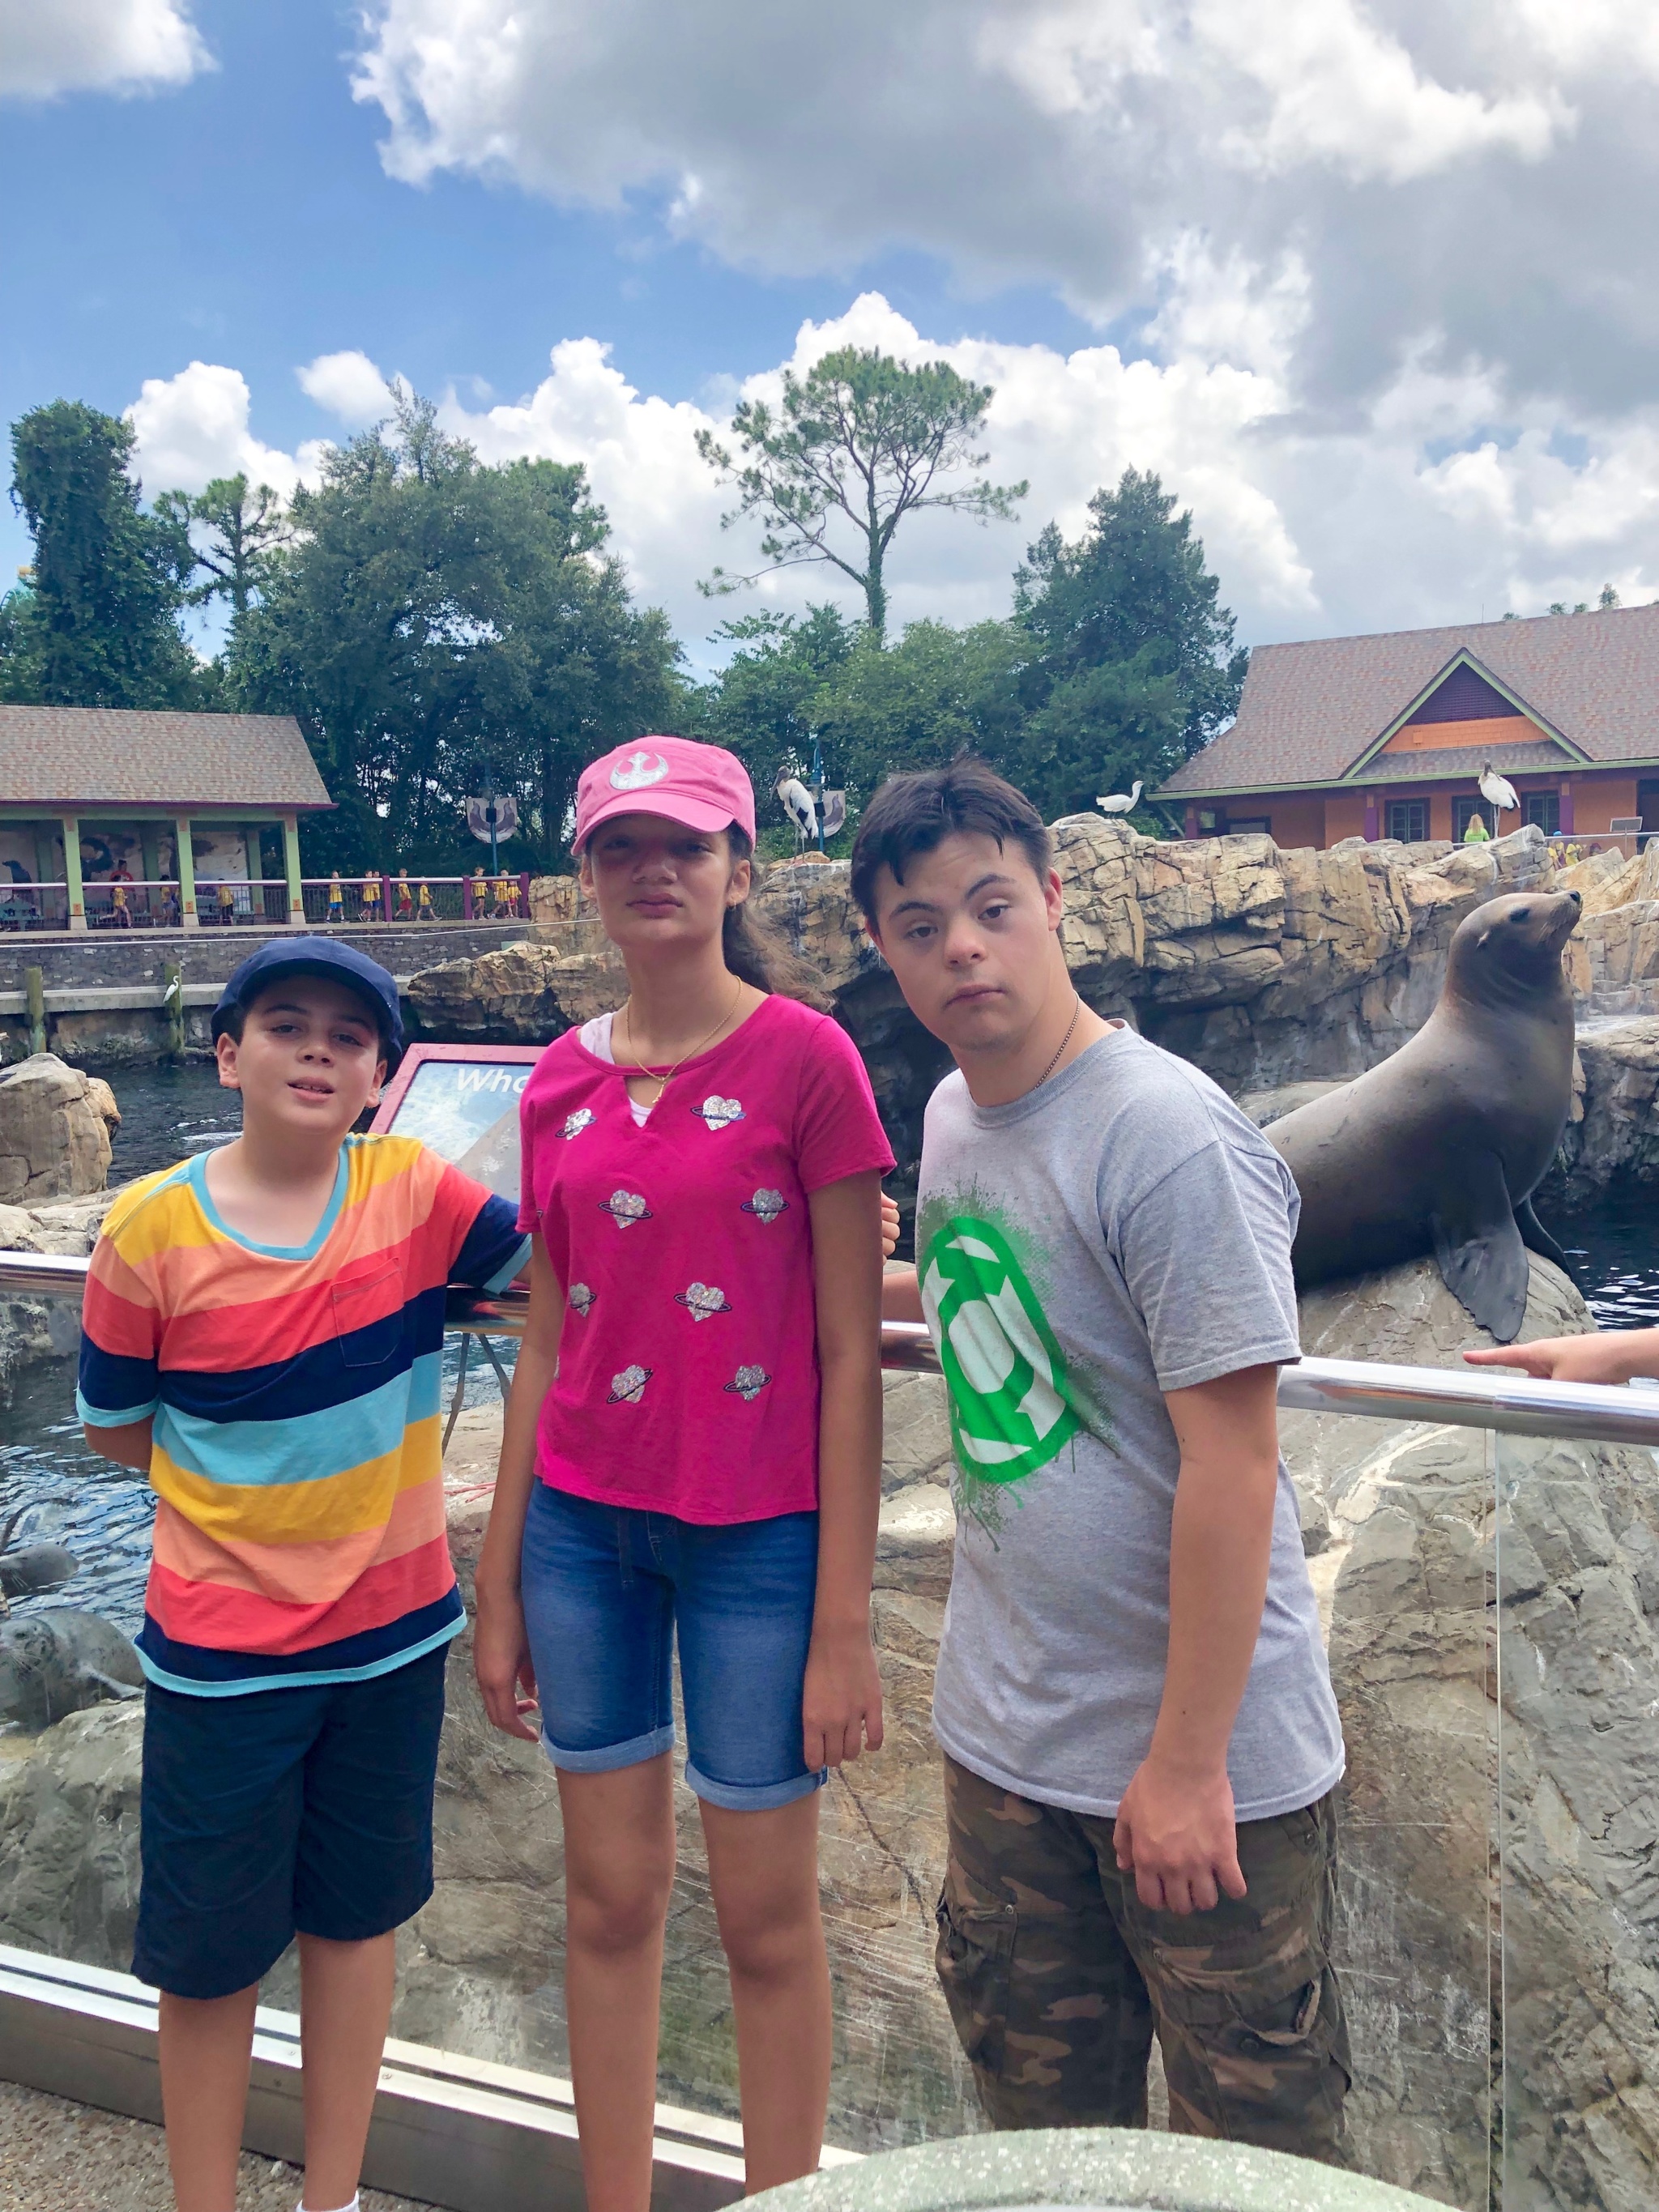 Make Traveling to Orlando with Extended Family Easier with These Simple Tips